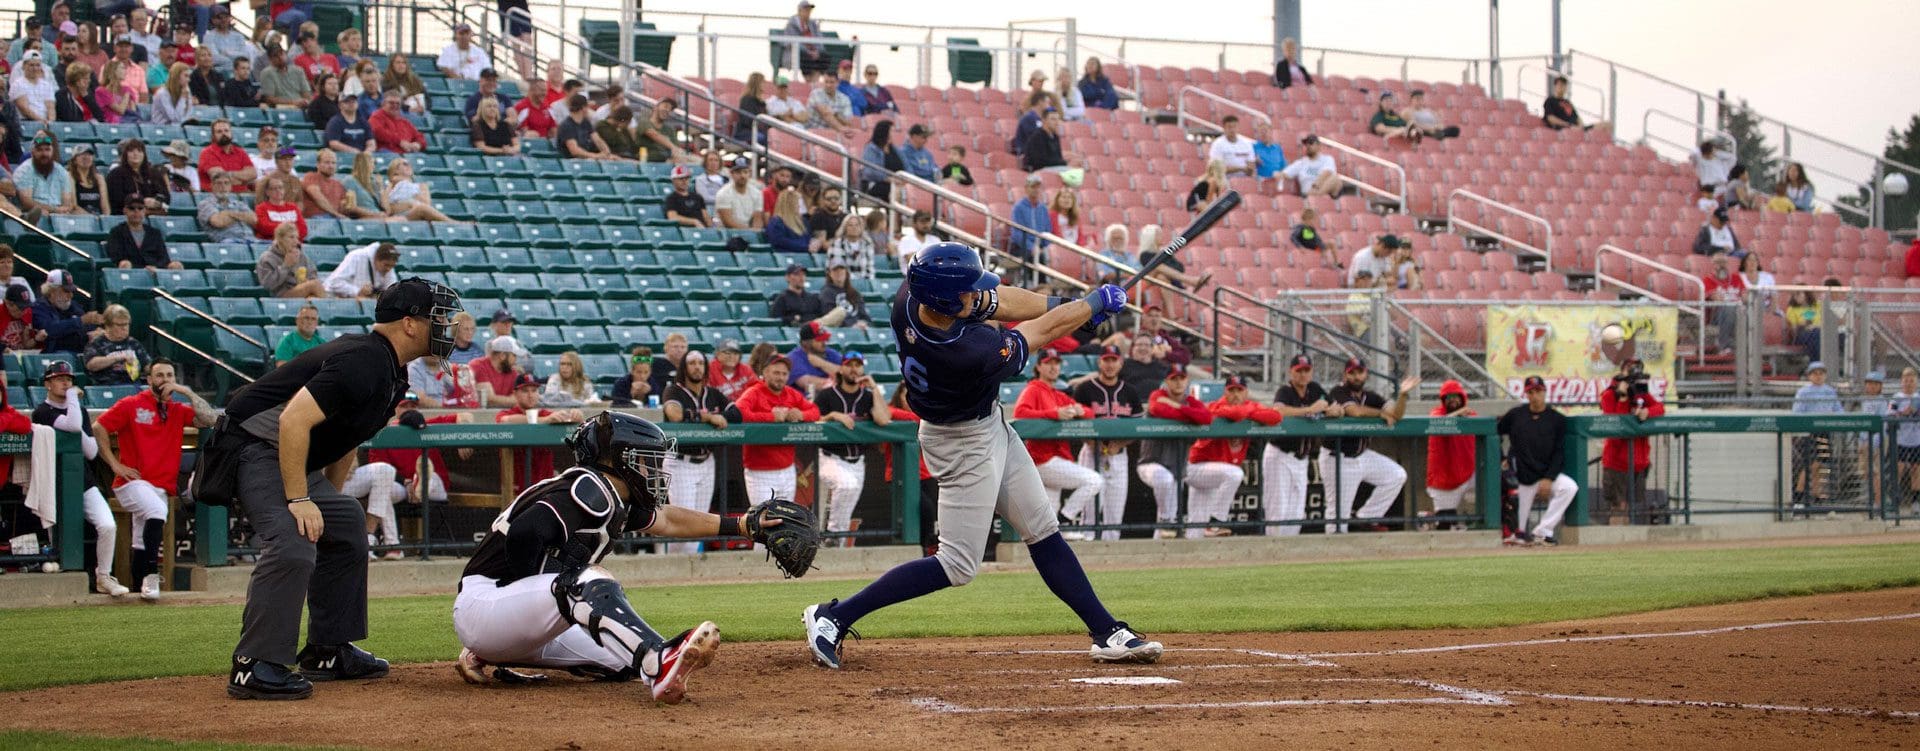 Marek Chlup continues to impress as a DockHounds Outfielder